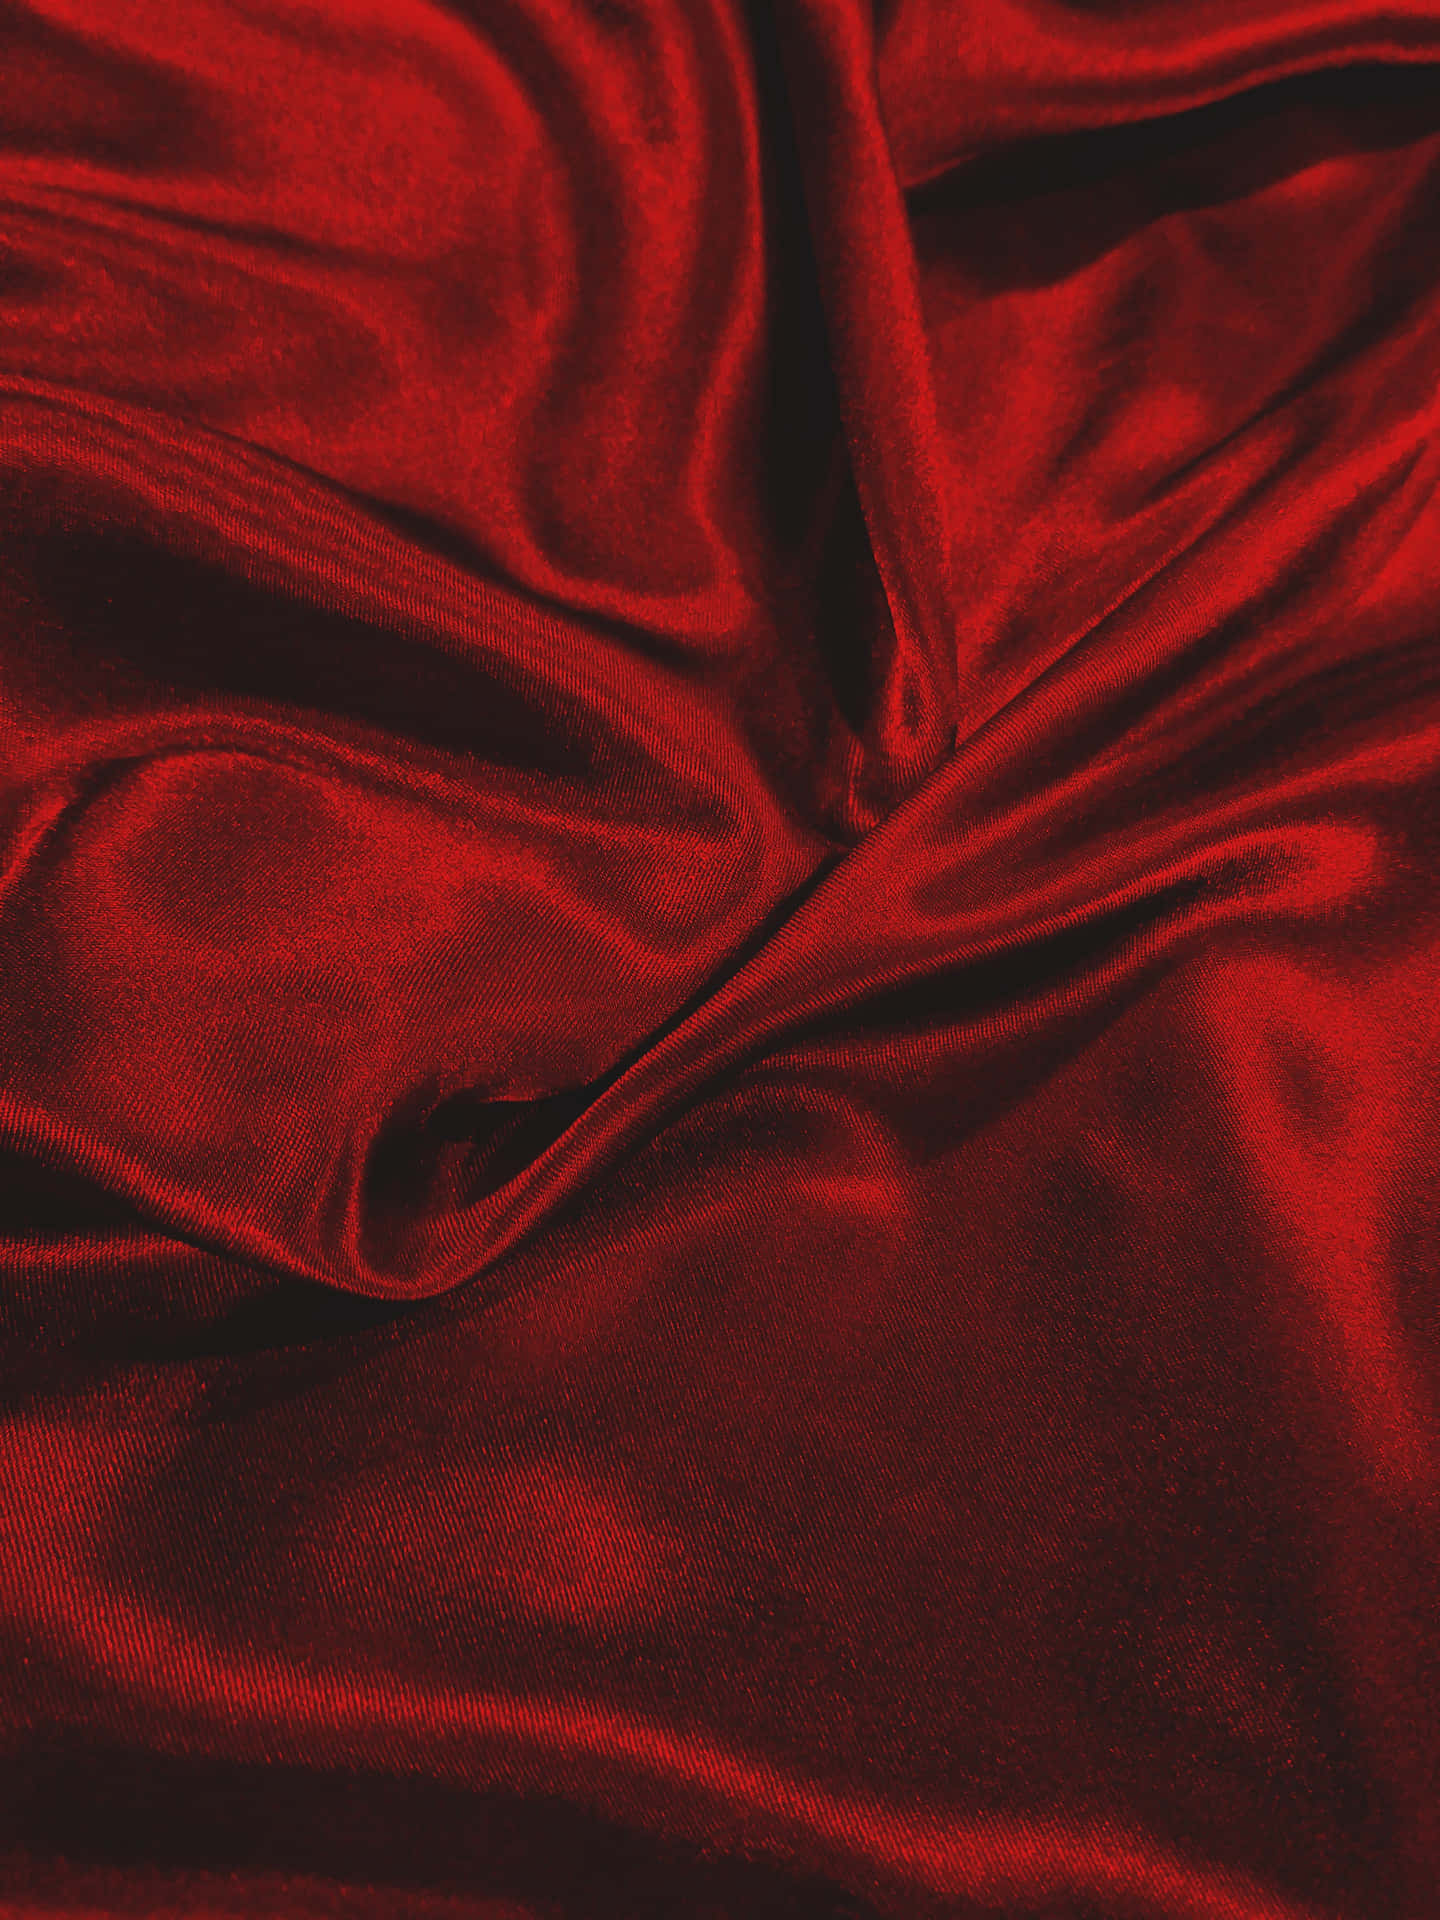 Red Satin Fabric Background